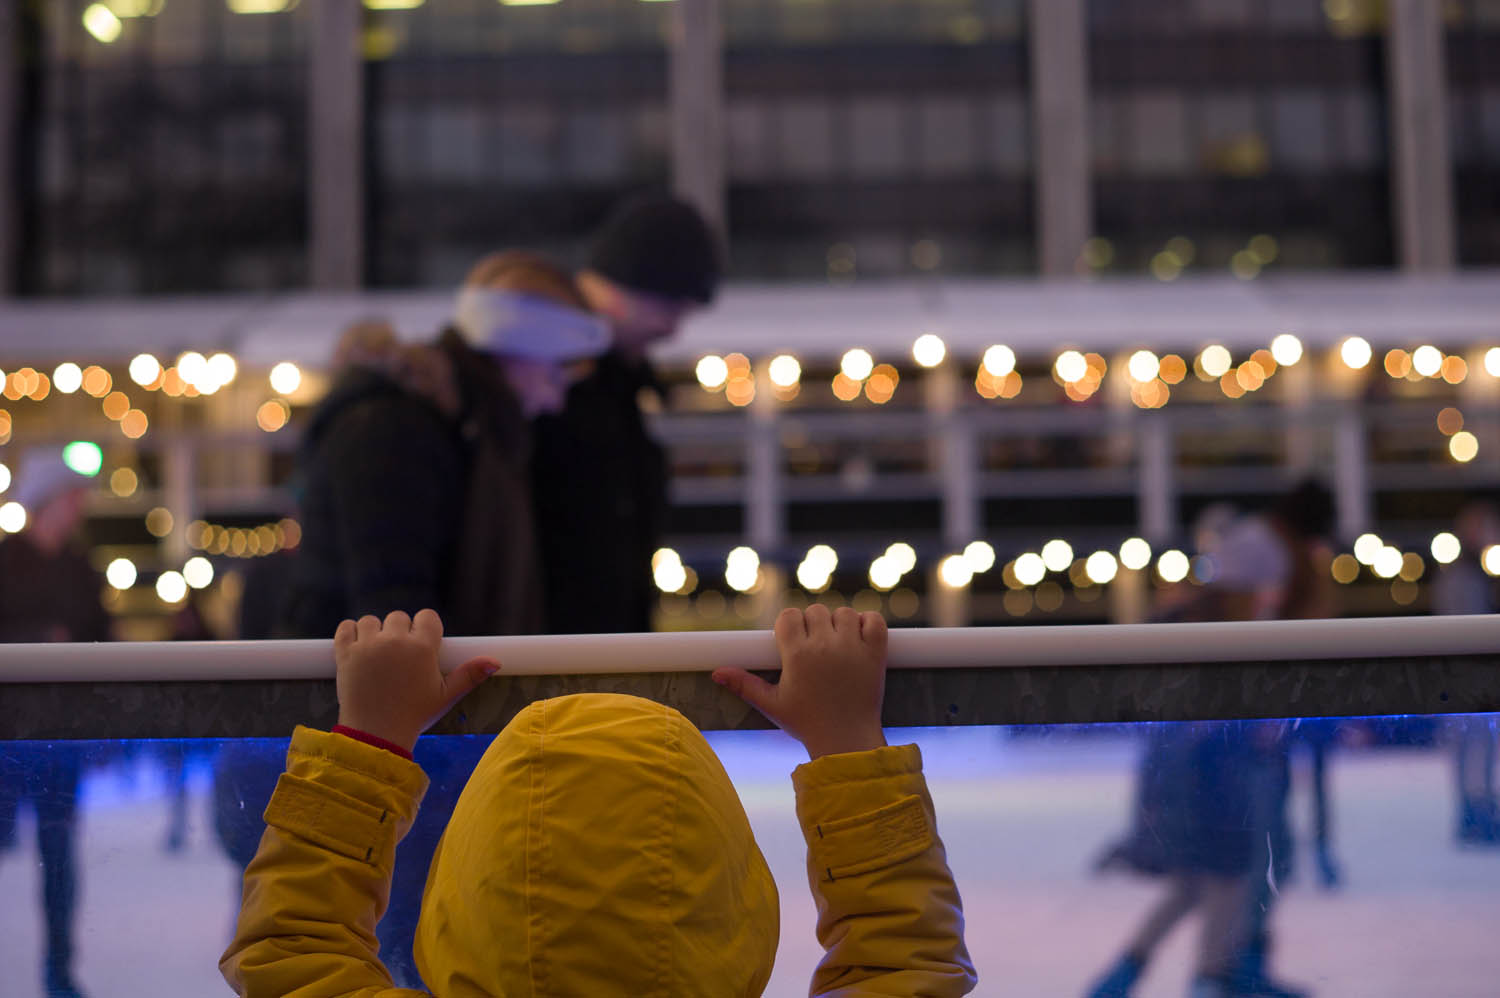 A child in a yellow jacket peers over the rail of an outside skating rink in London